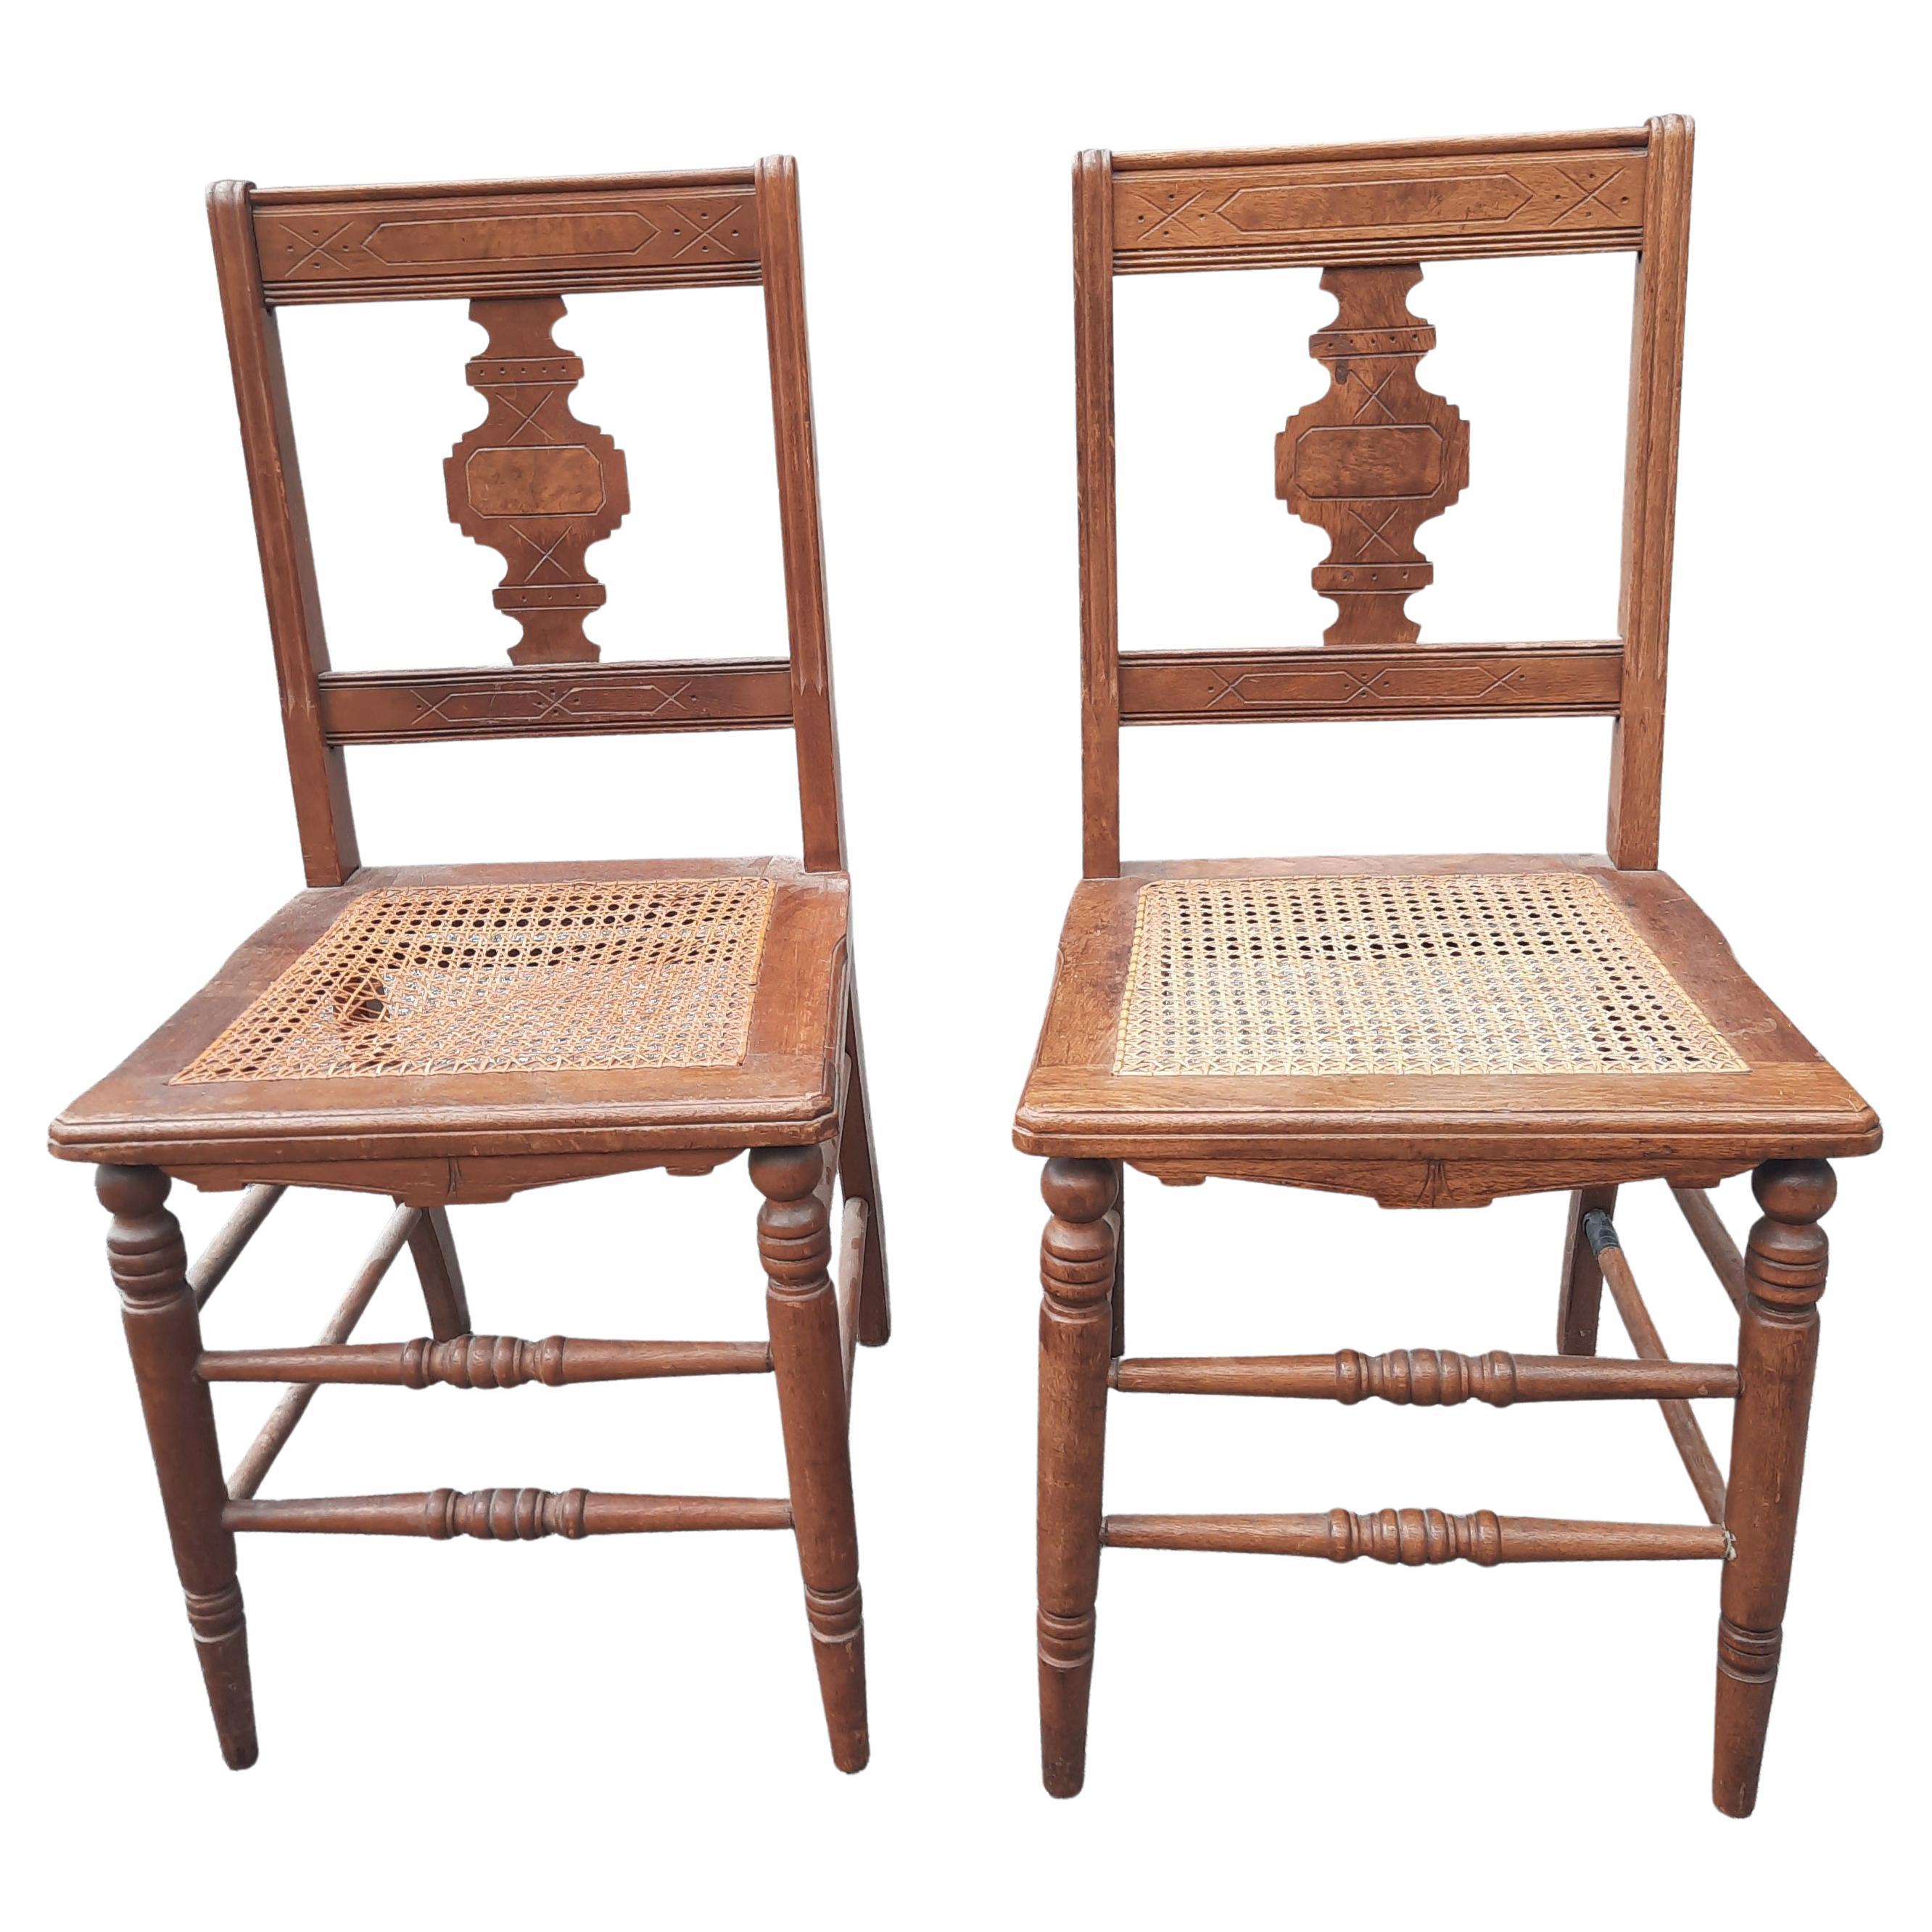 Pair of Late Victorian Walnut Inlays and Cane Seat Dining Chairs